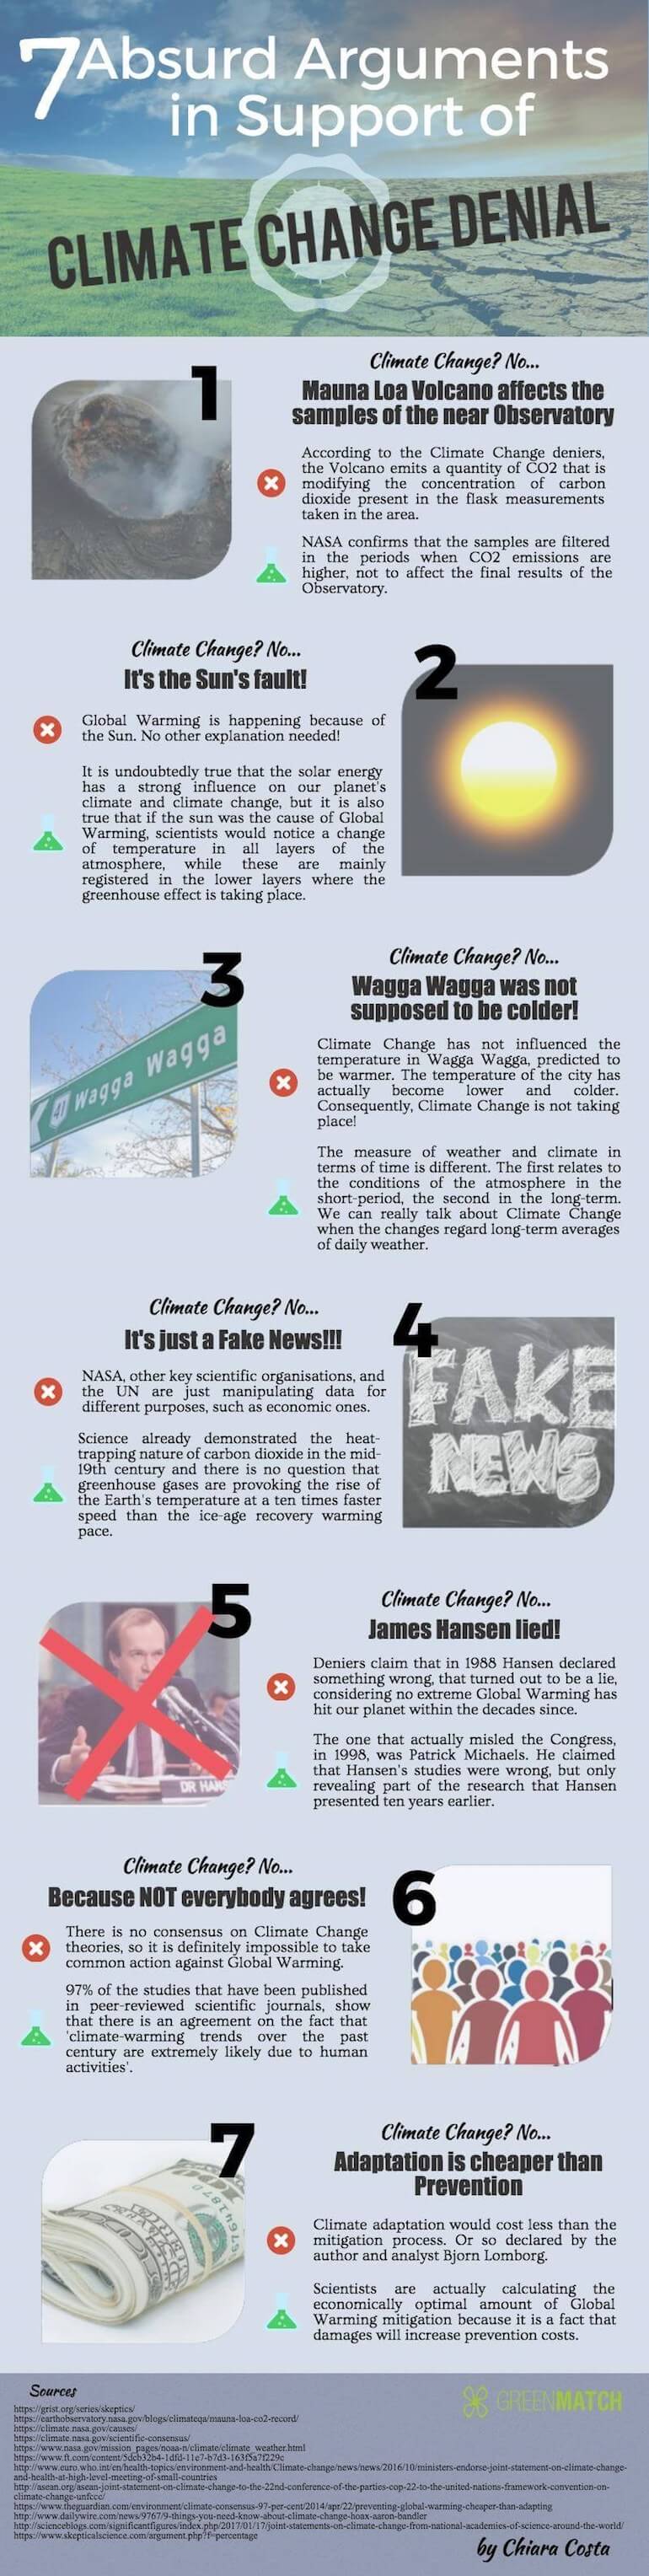 Infographic about Climate Change Denial